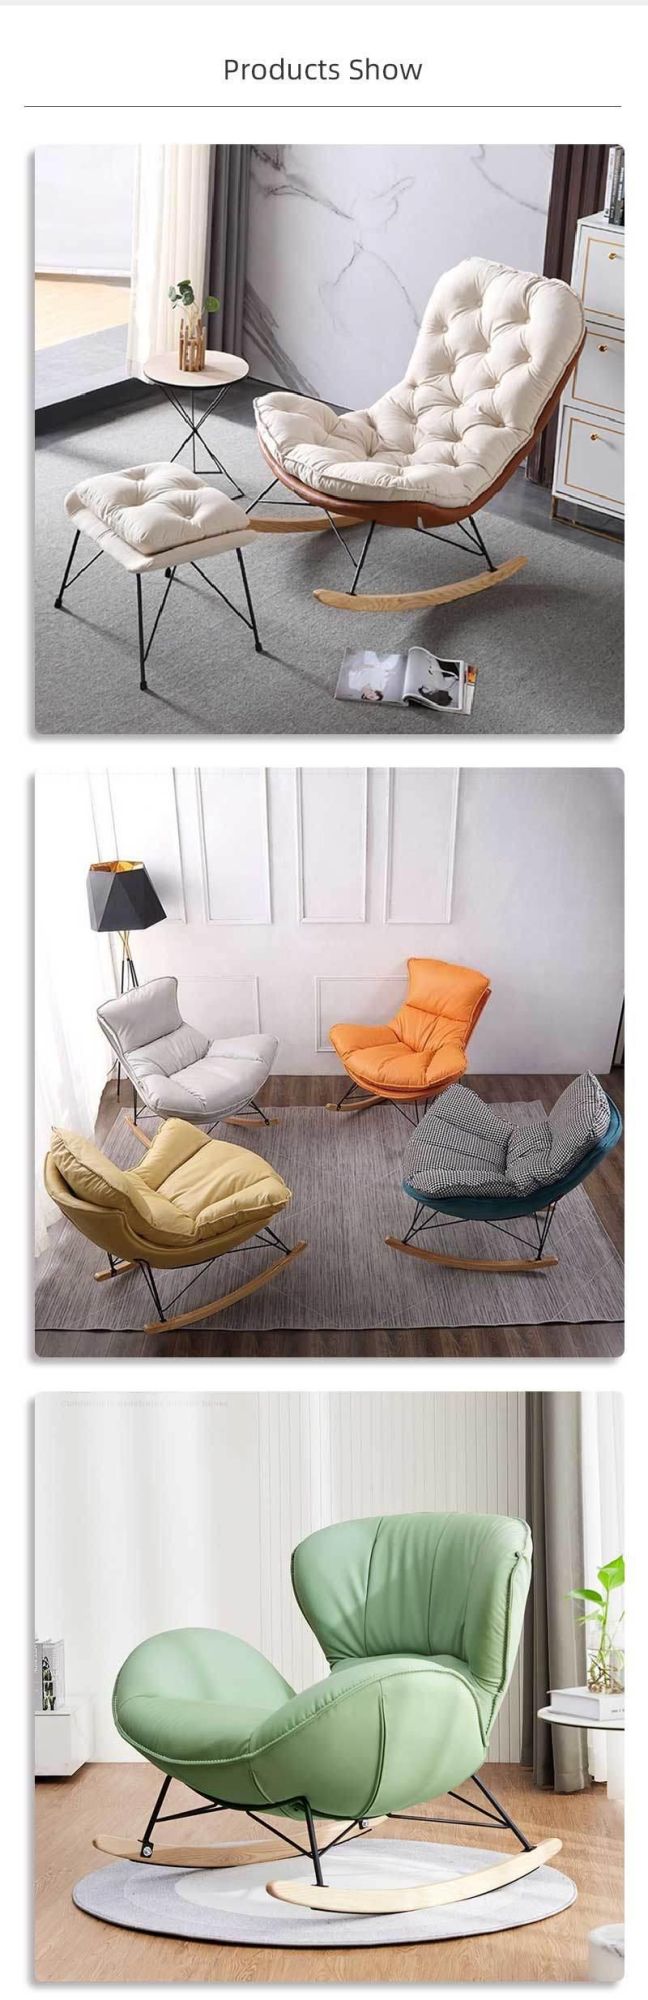 Office Leisure Home Iron Hardware Furniture Negotiation Fabric Sofa Chair